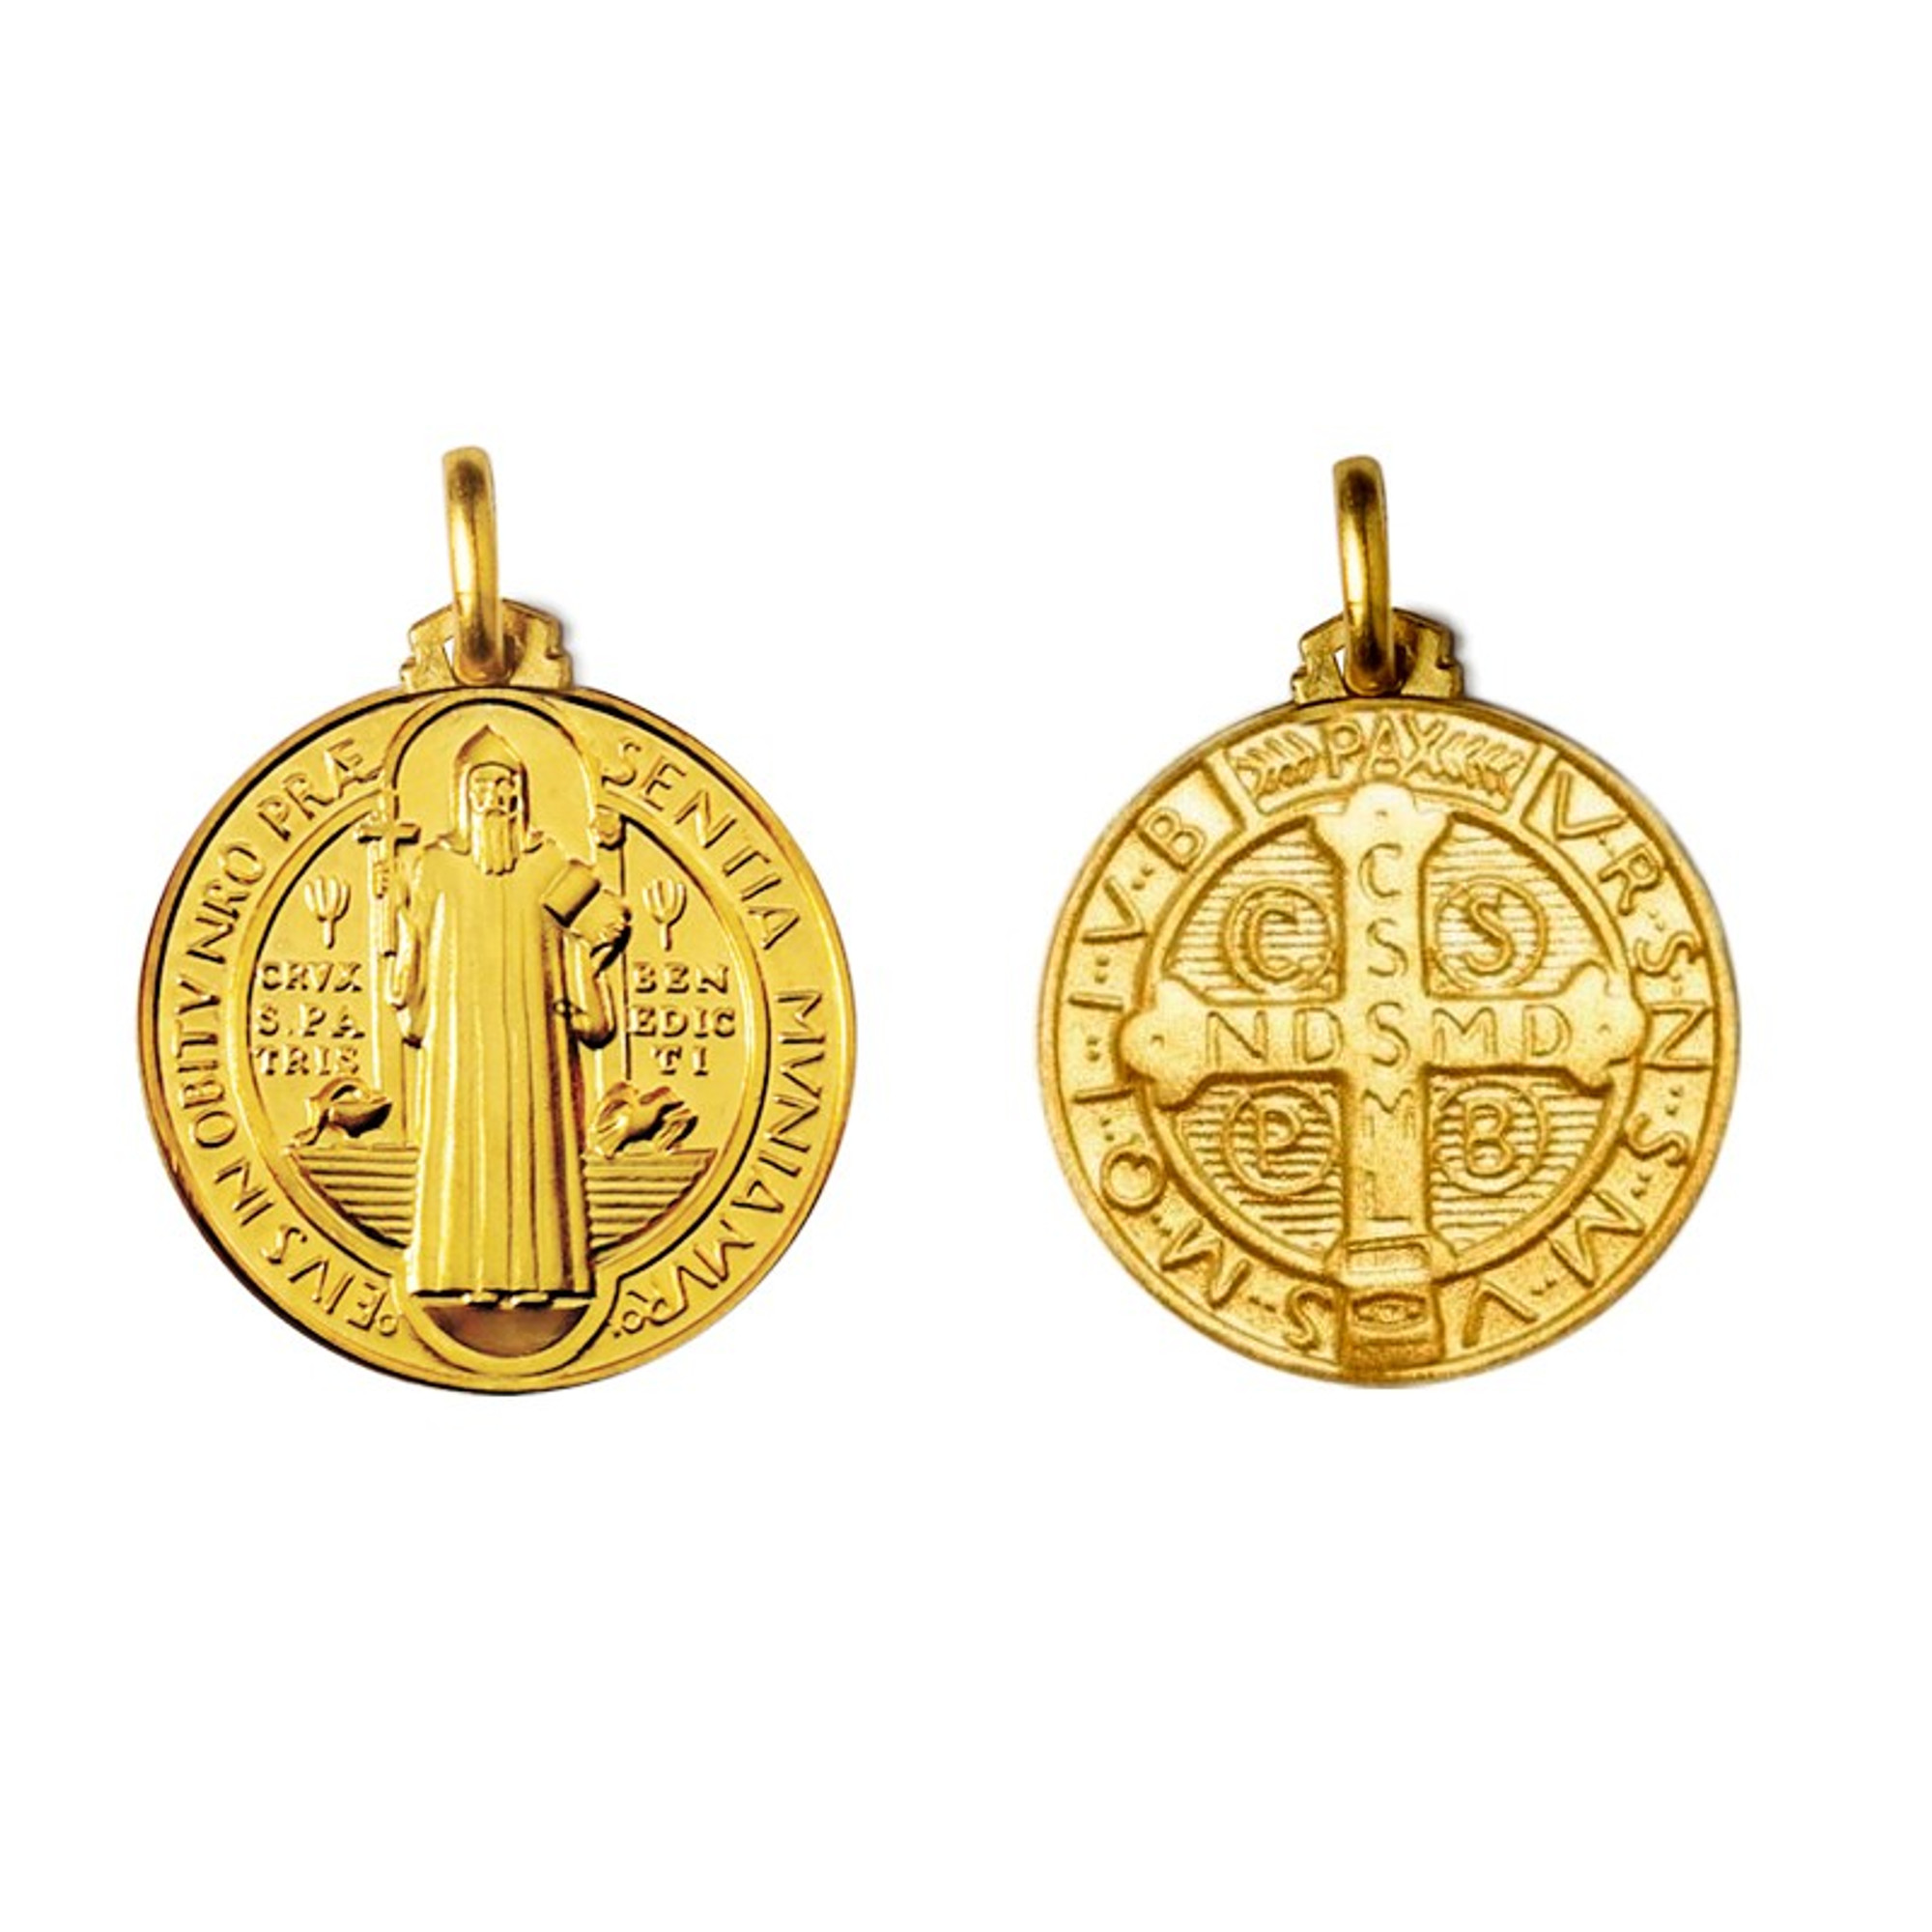 St. Benedict Medal - 14kt Gold Round Pendant (2 Sizes)